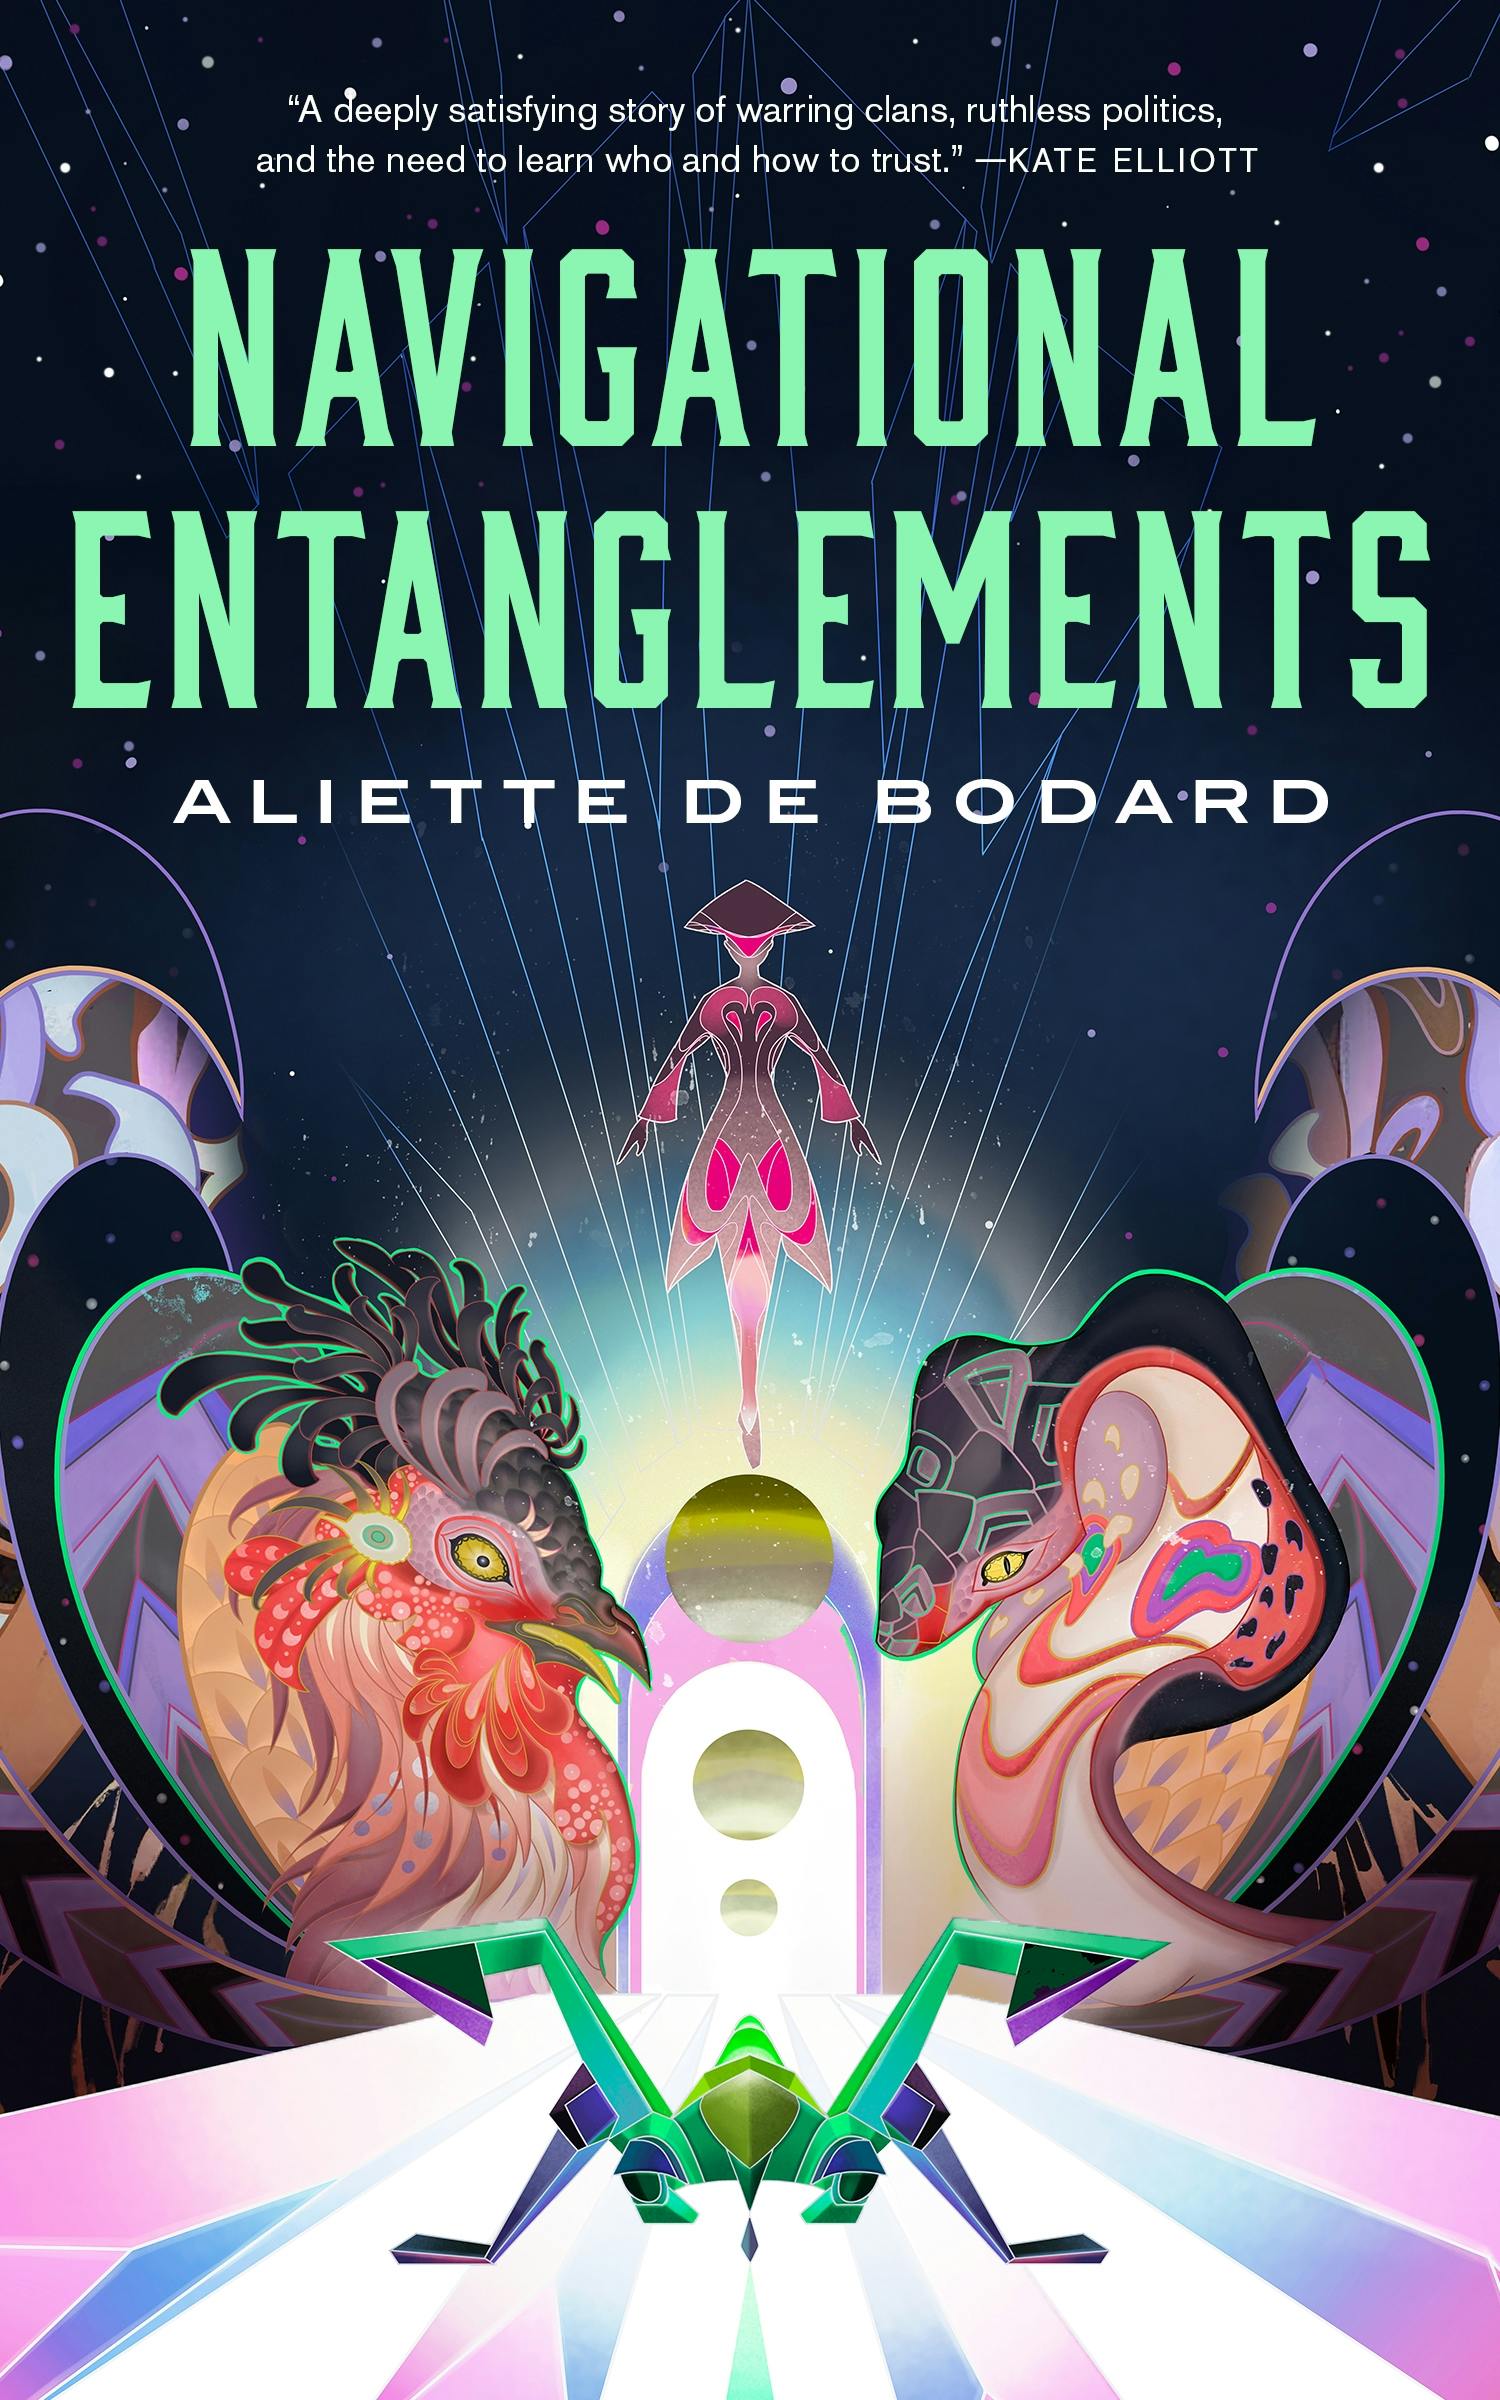 Cover for the book titled as: Navigational Entanglements